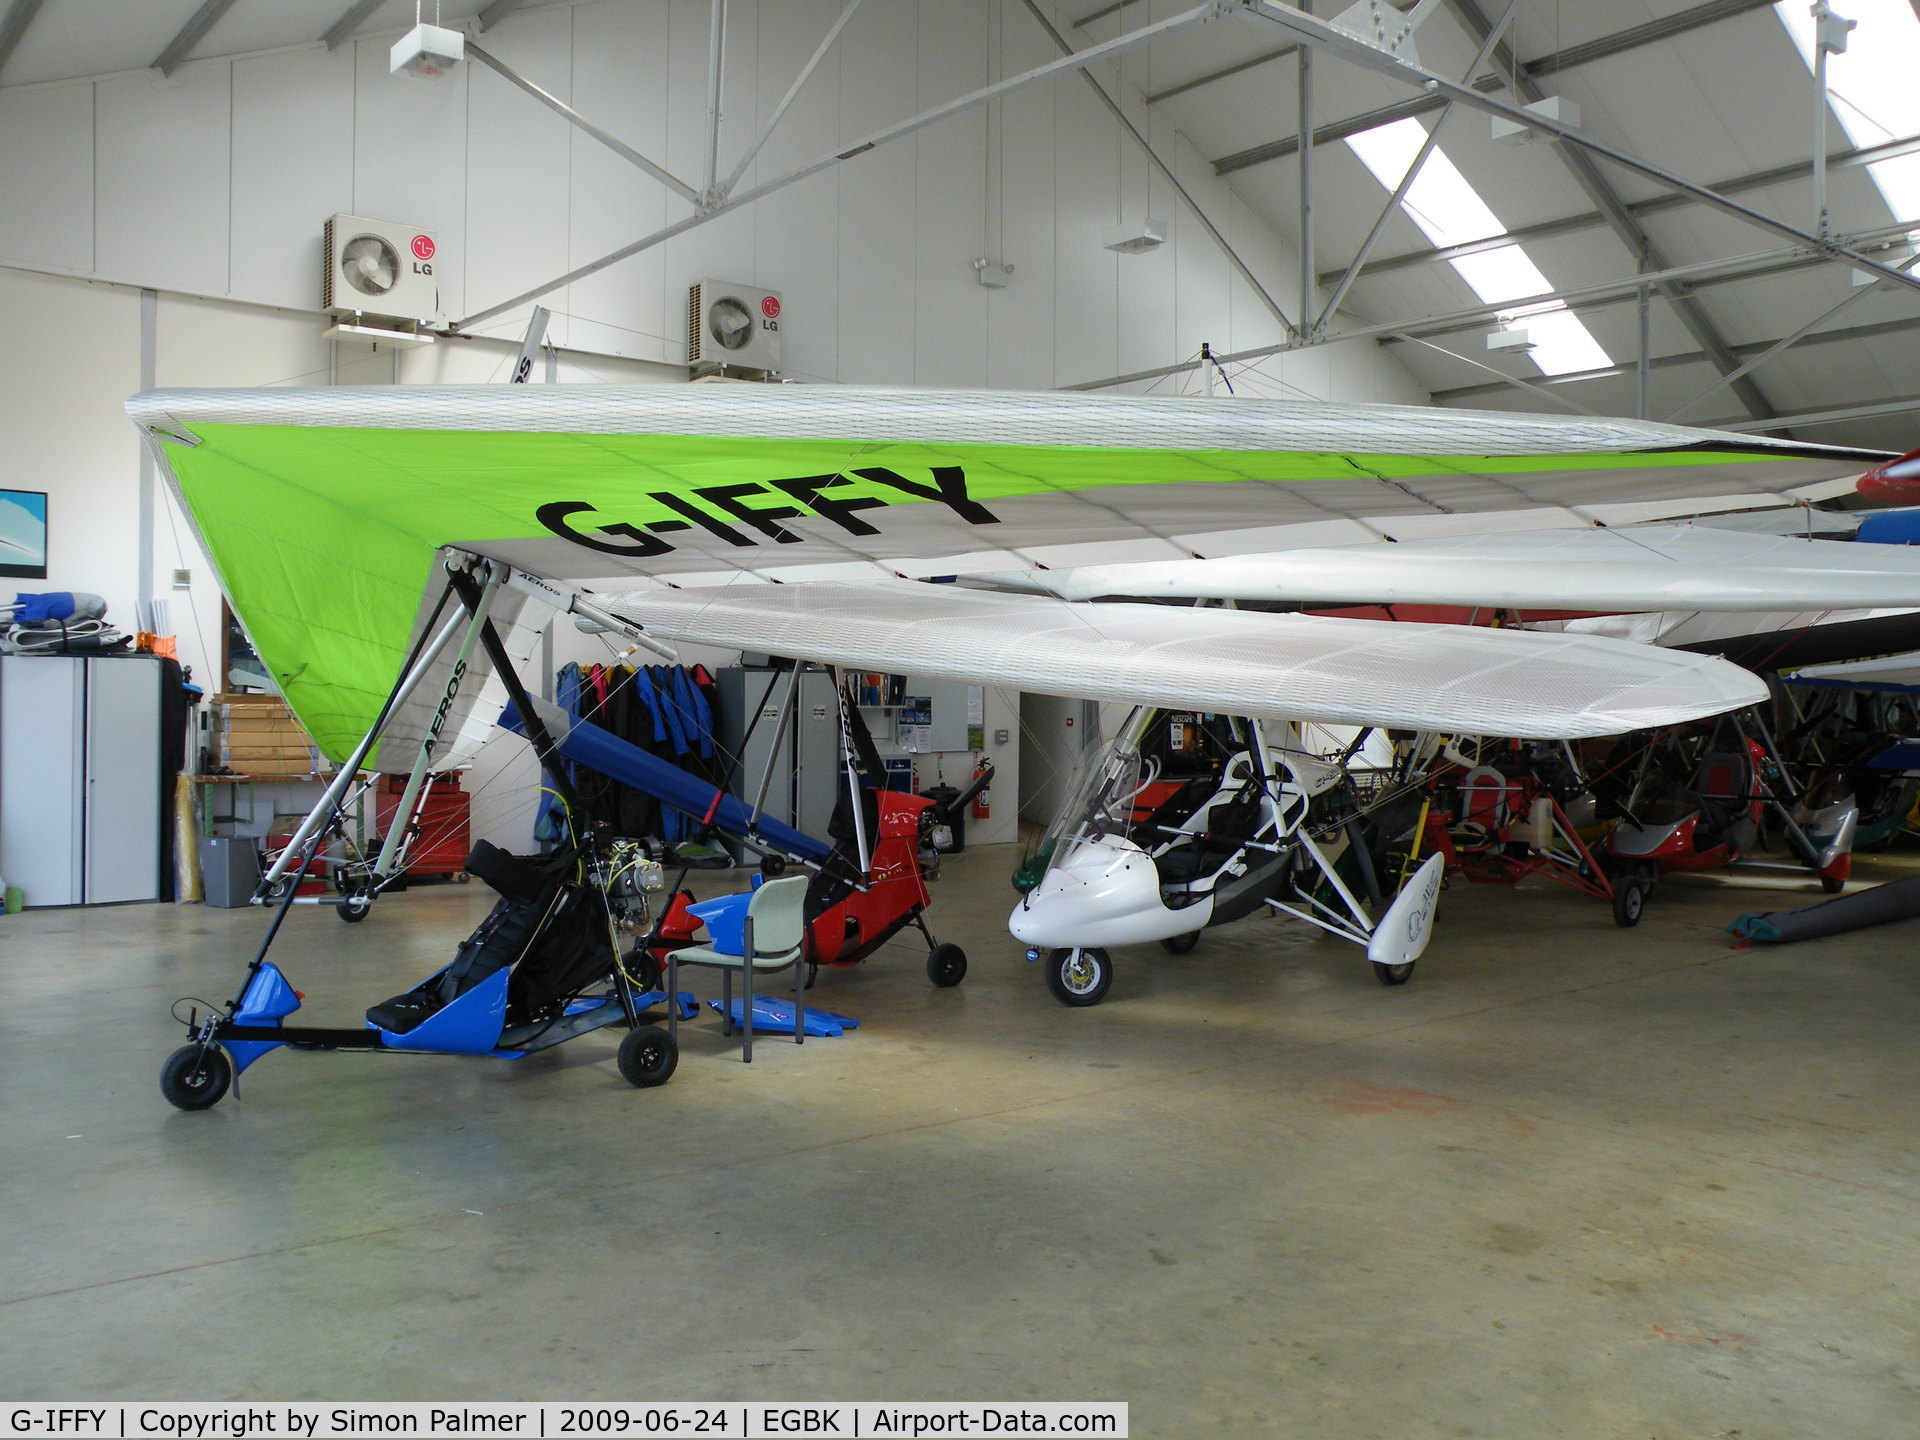 G-IFFY, Flylight Airsports Dragonfly C/N 033, In the hangar at Sywell